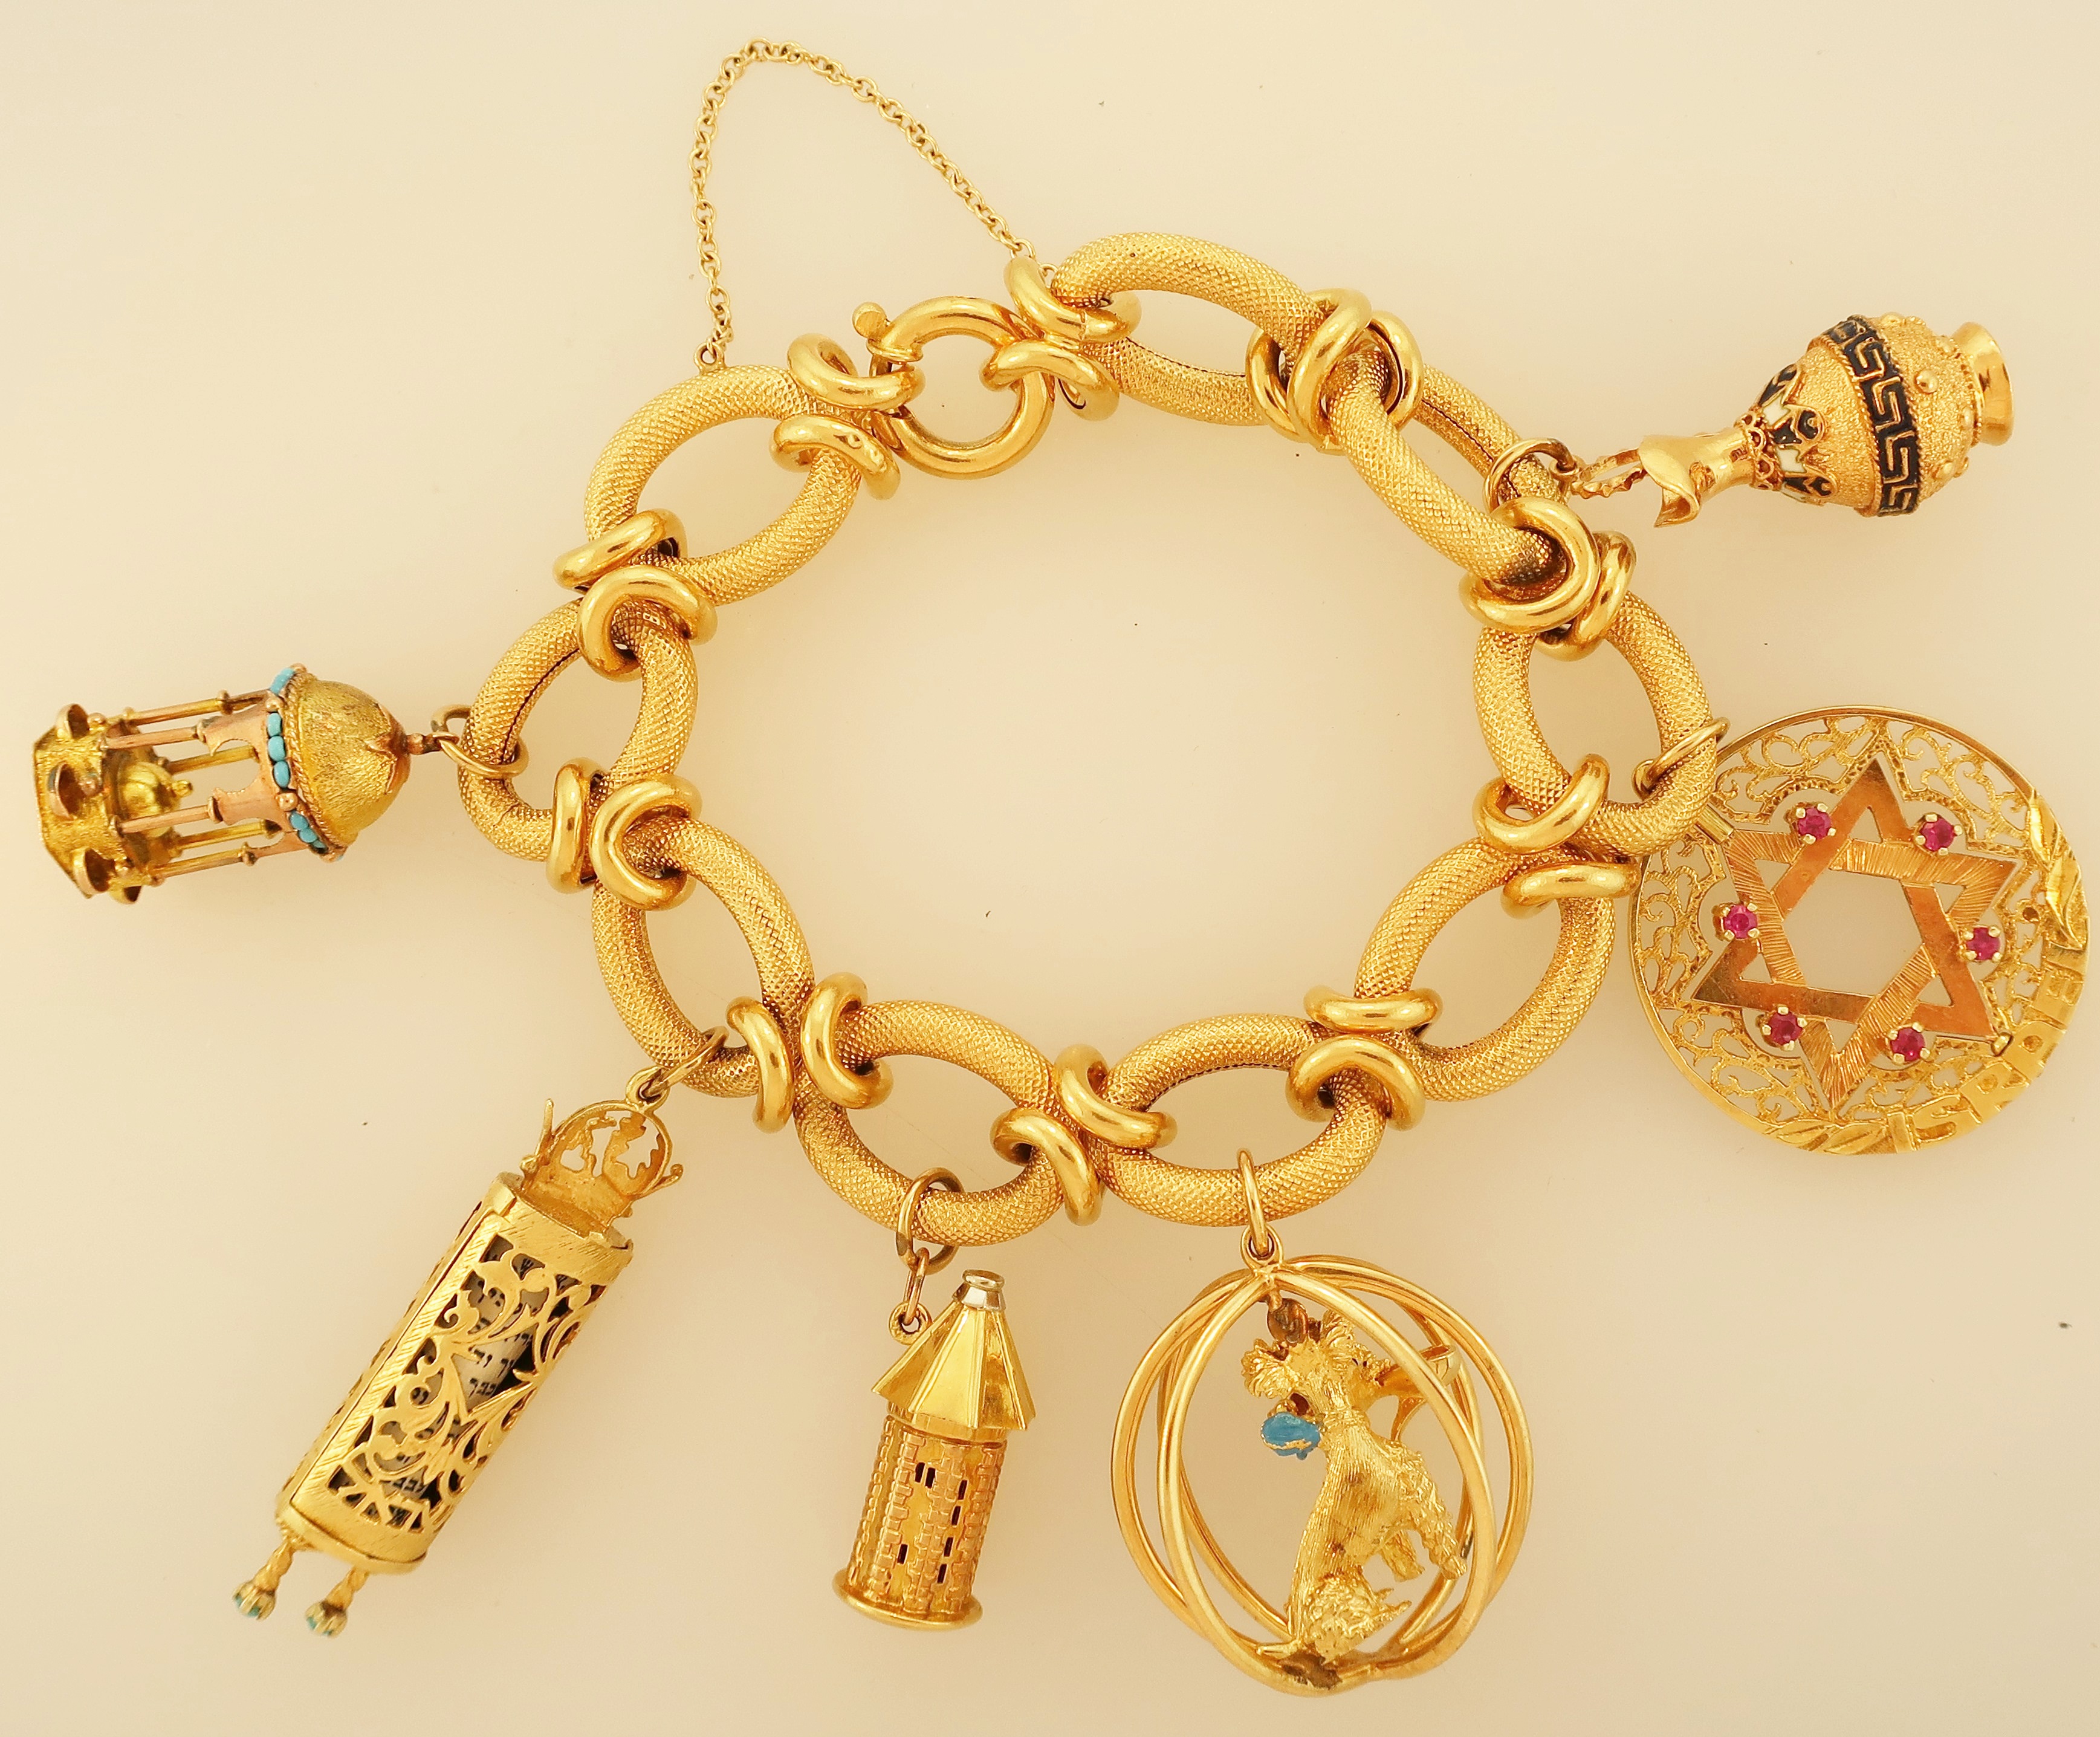 Lot 314. 18K Gold Charm Bracelet With Charms. Sold For $3,000